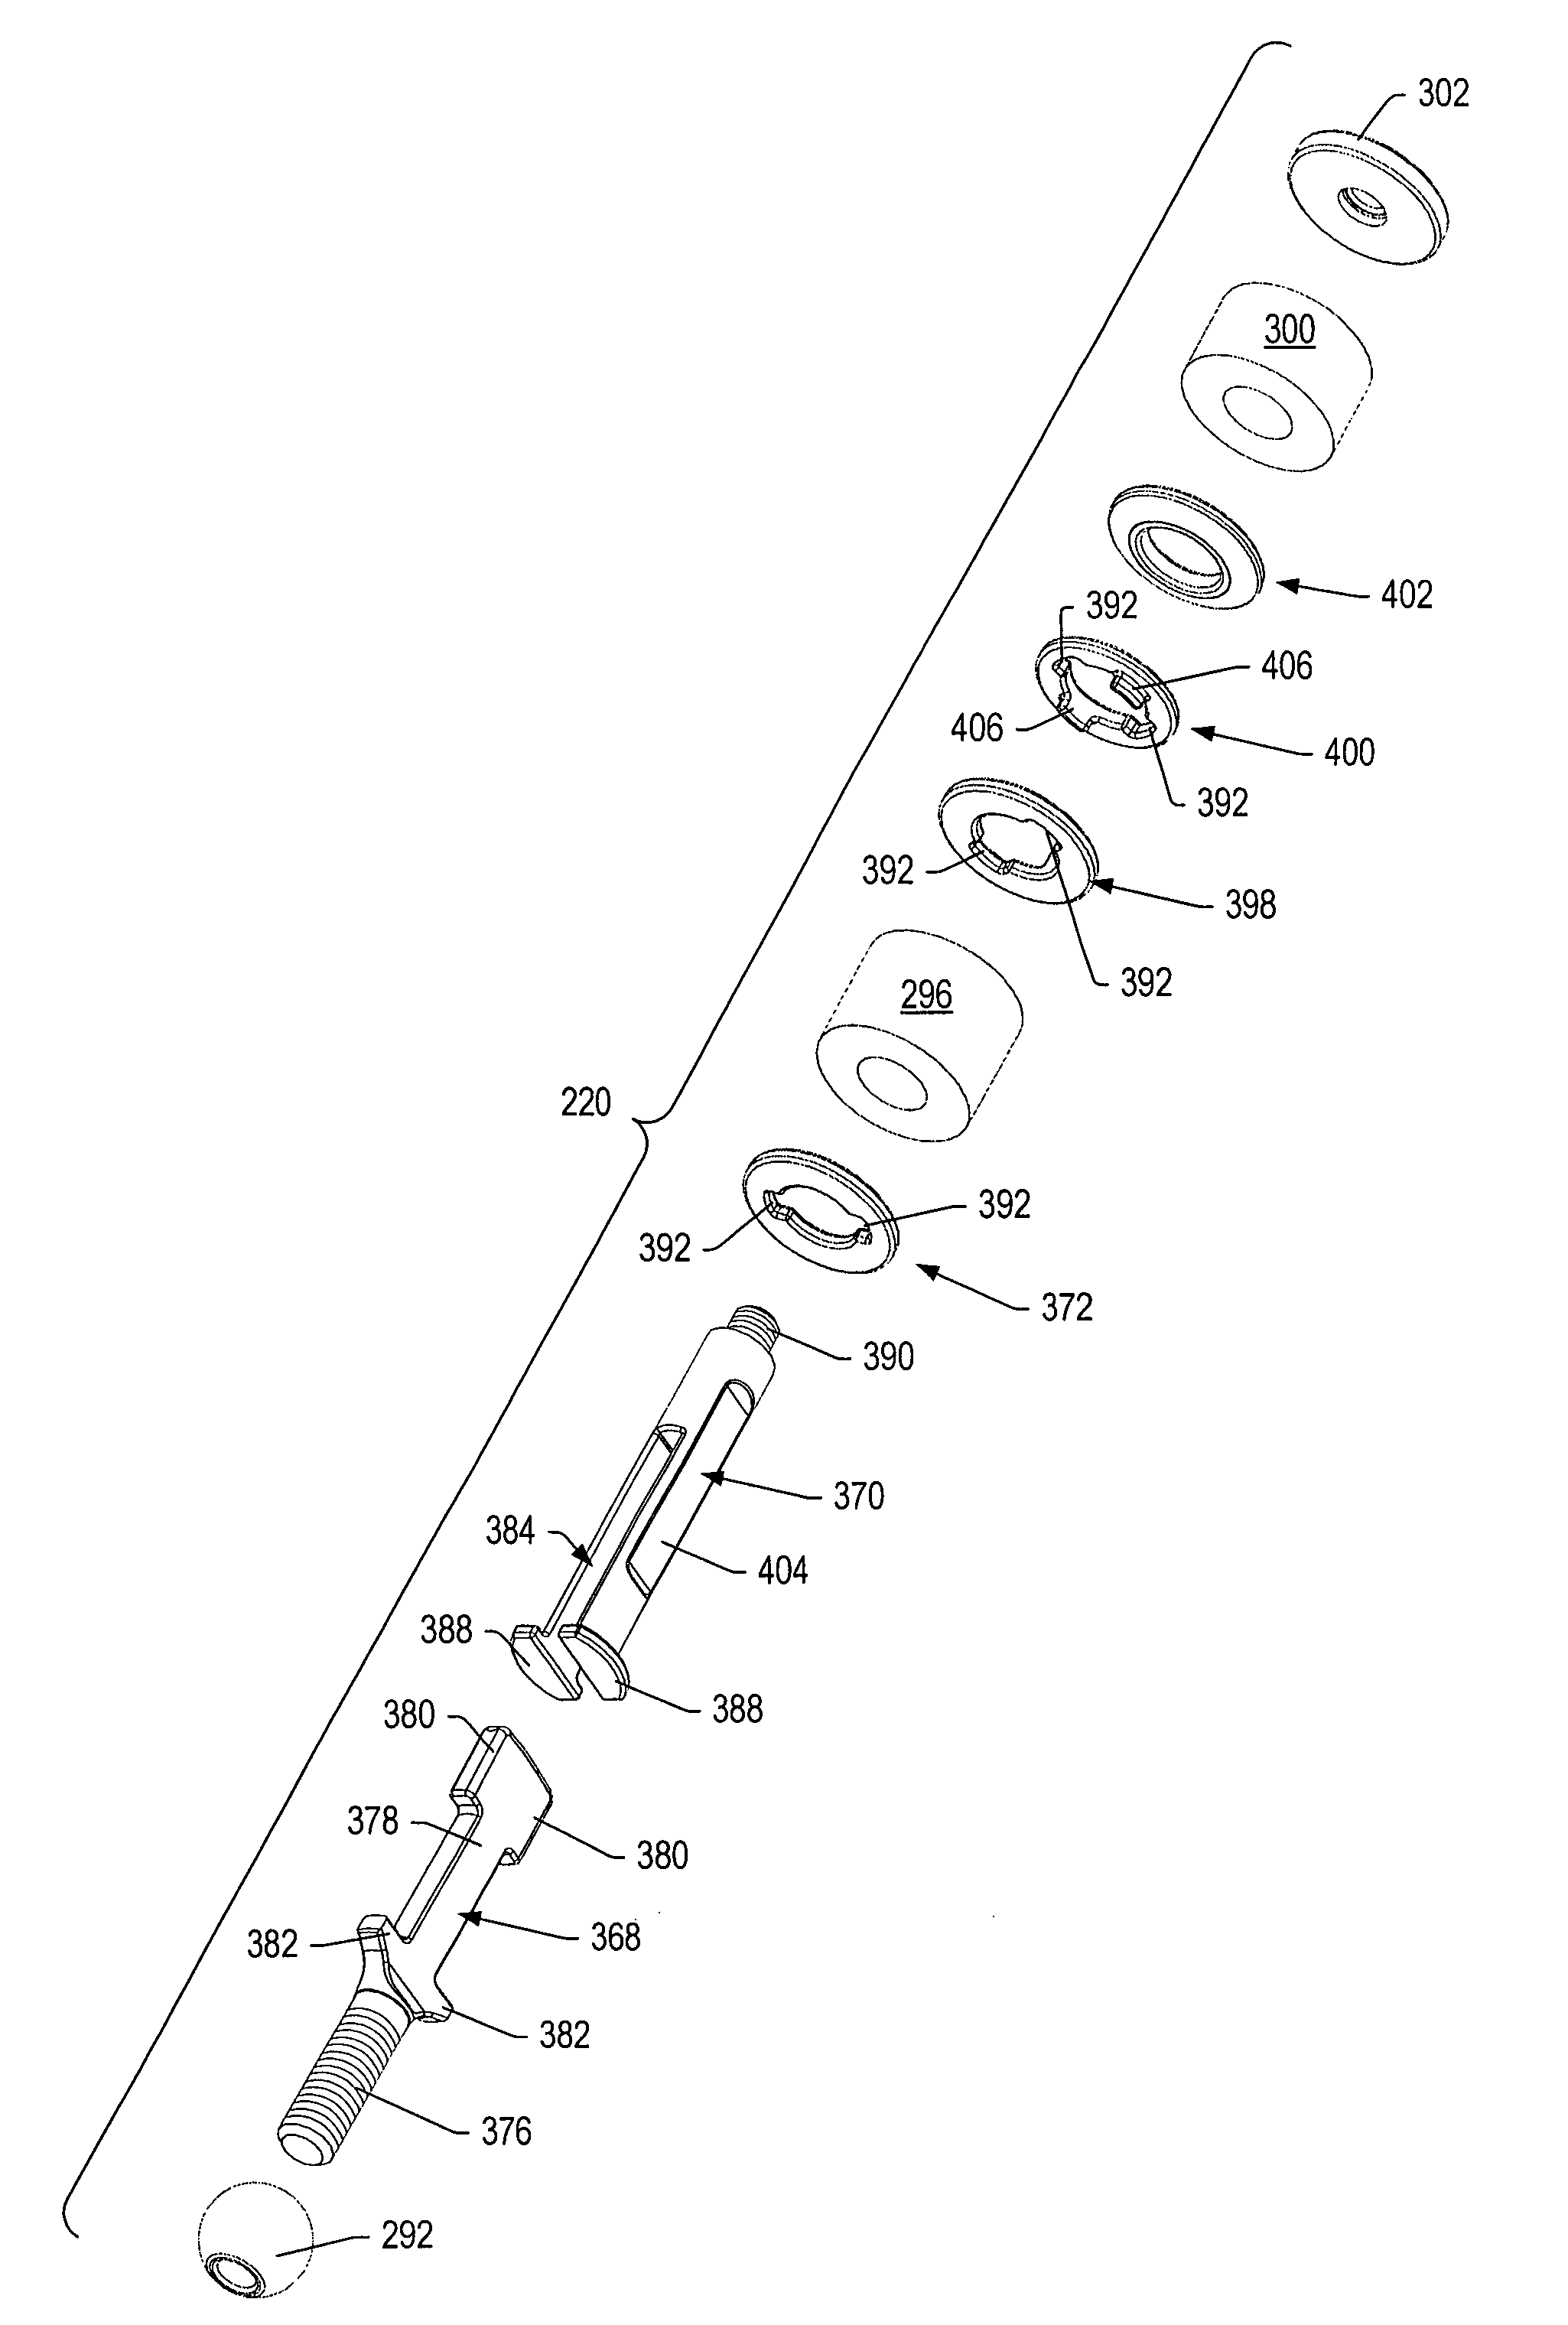 Dampener system for a posterior stabilization system with a variable length elongated member